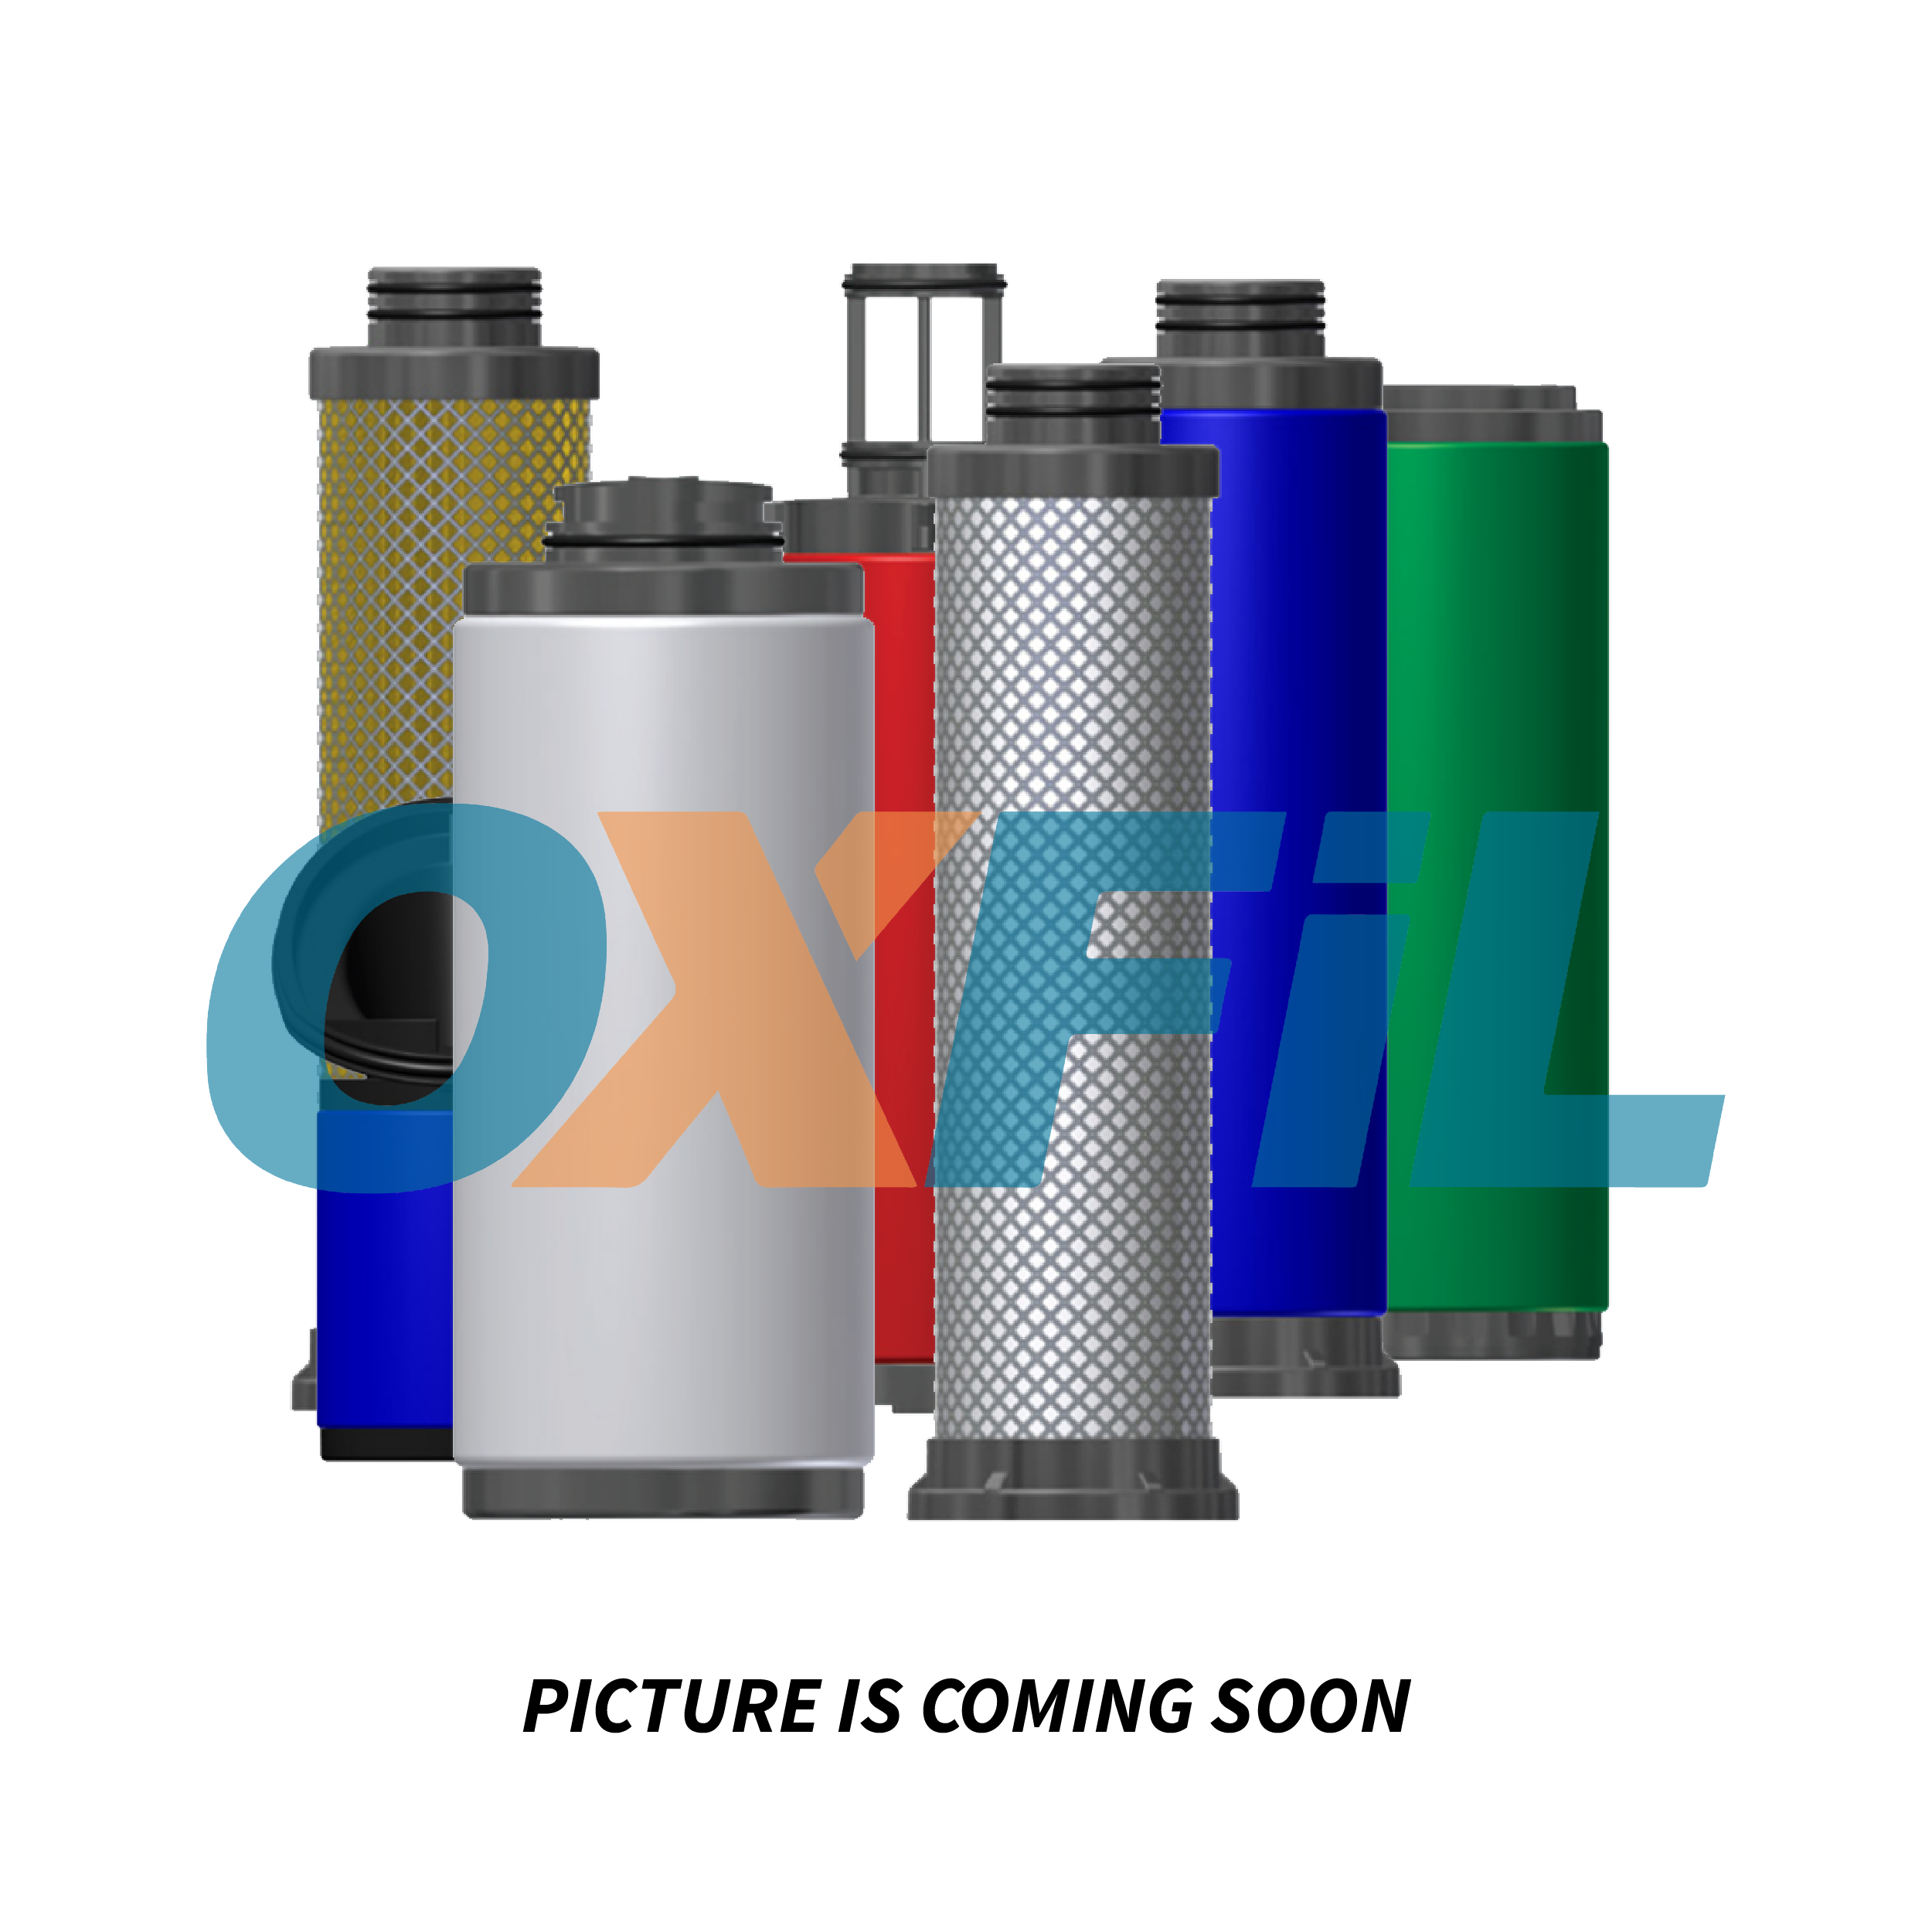 Related product IF.4505 - In-line Filter